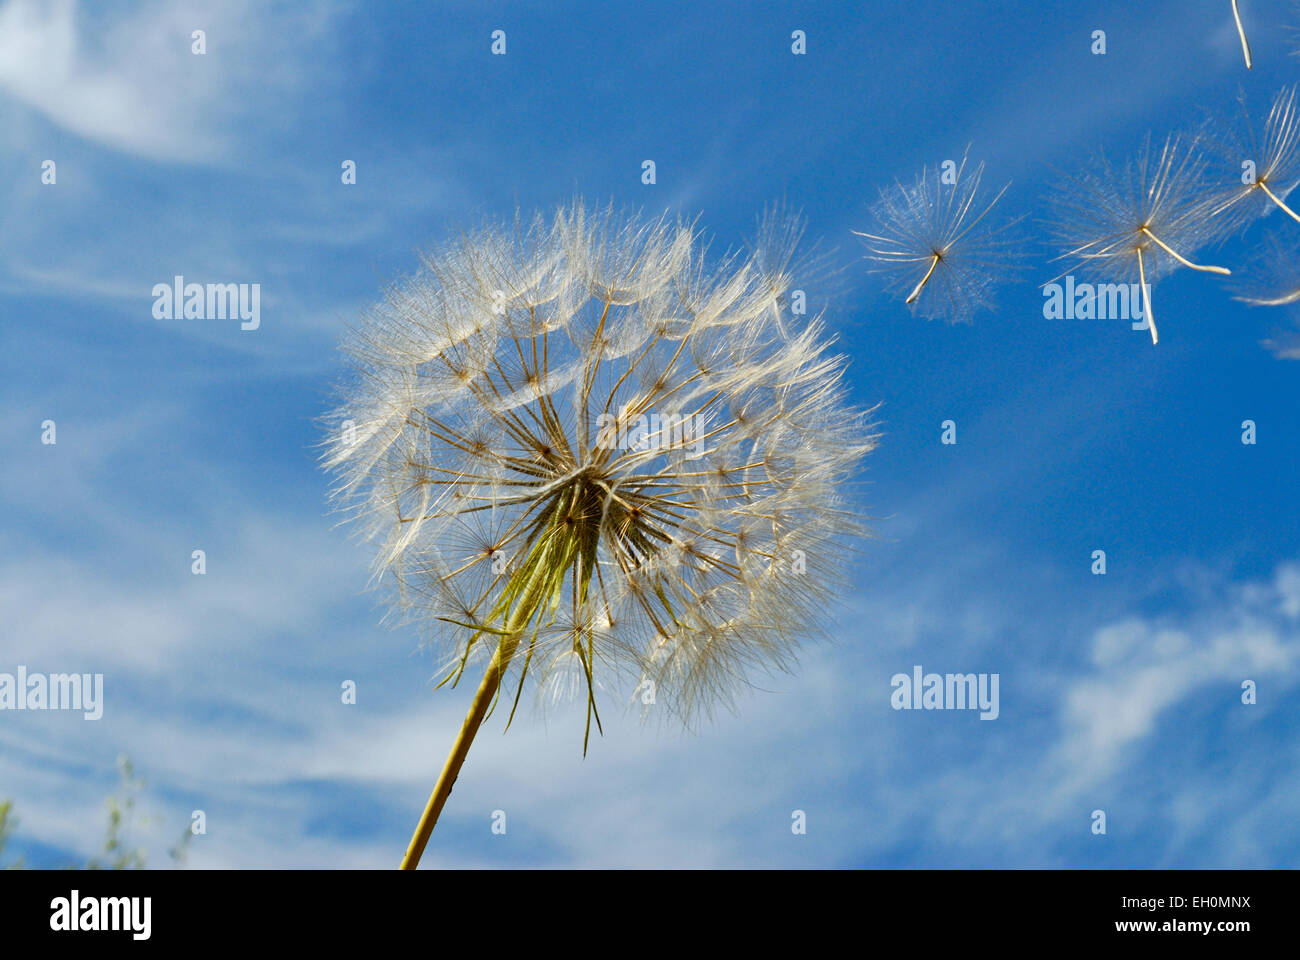 Dandelion seed head and seeds blowing in the wind against blue sky Stock Photo